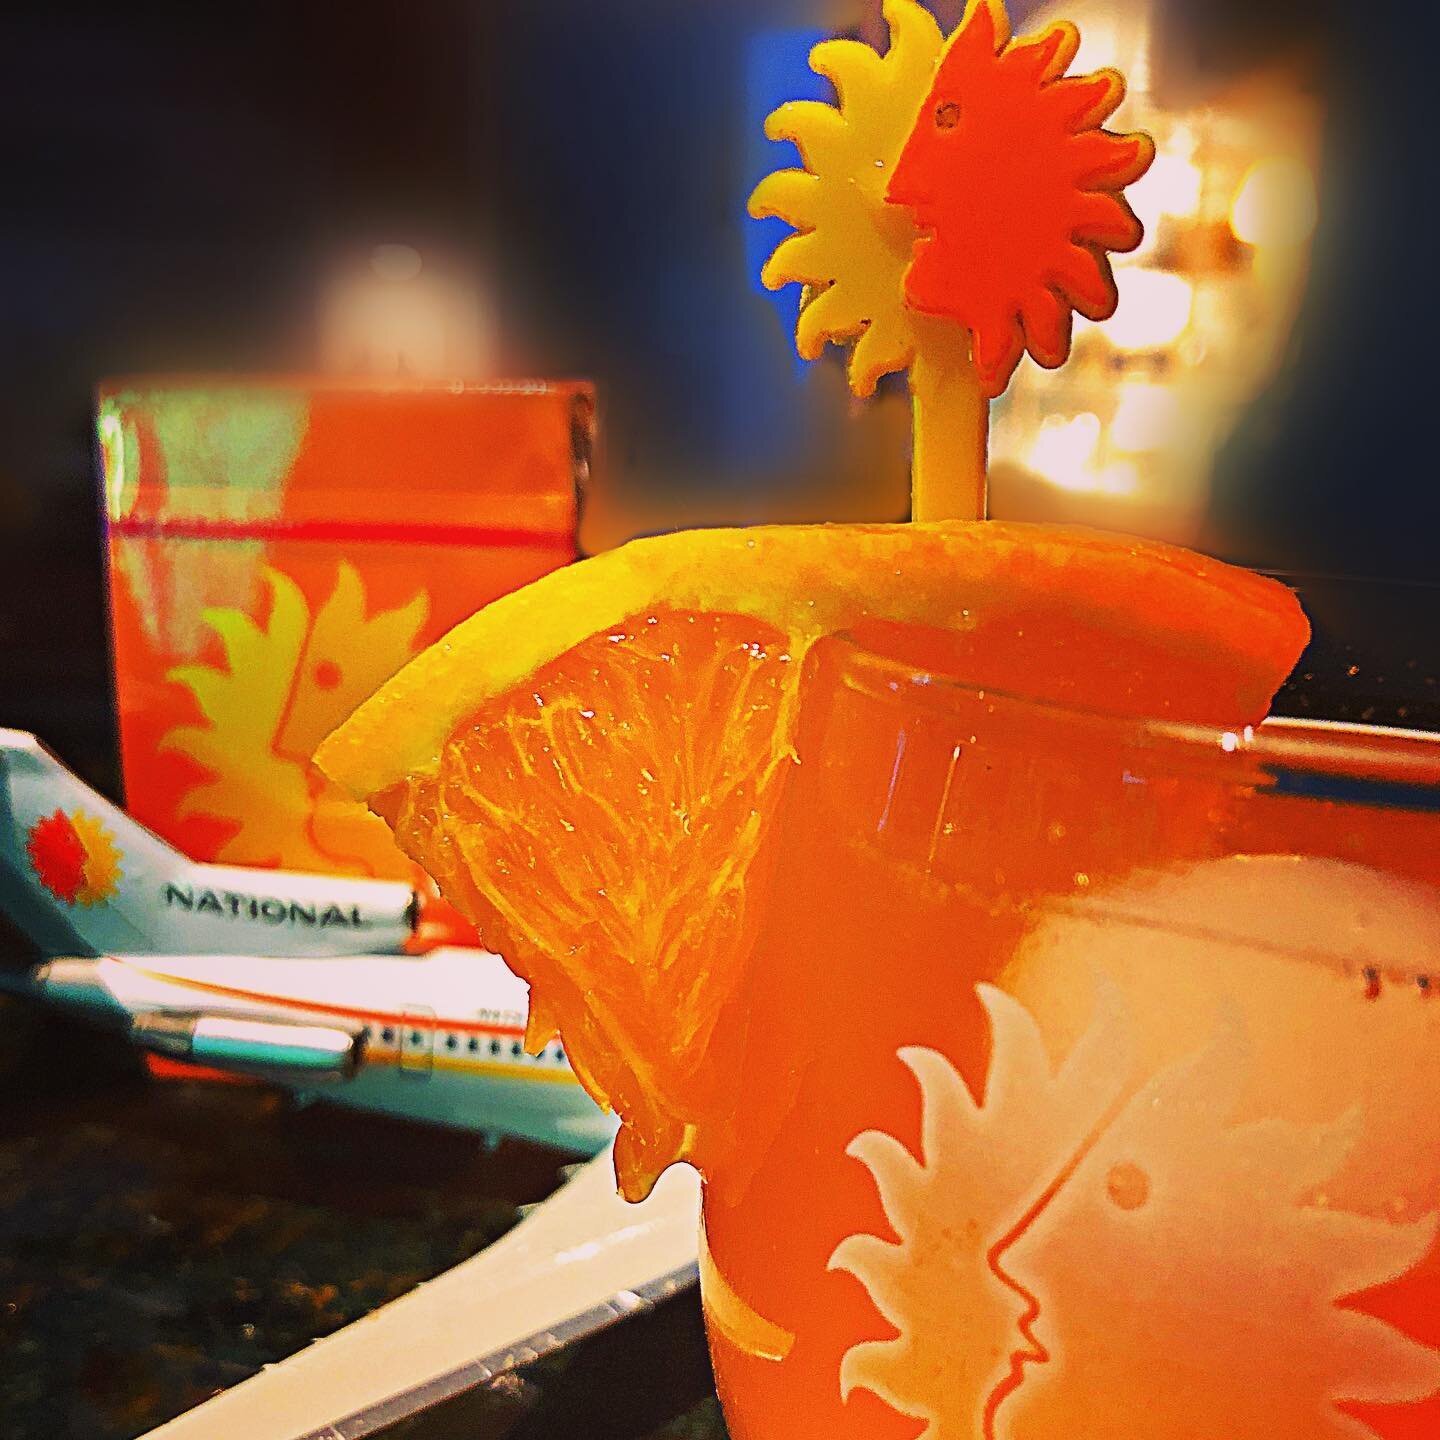 The perfect National Airlines vintage &rdquo;Sunrise&rdquo; Screwdriver calls for chilled Ketel One vodka plus pulp-free premium OJ, ice, and an orange wedge. Serve in the lounge, onboard @ pre-departure, in flight, or poolside at destination. #miami